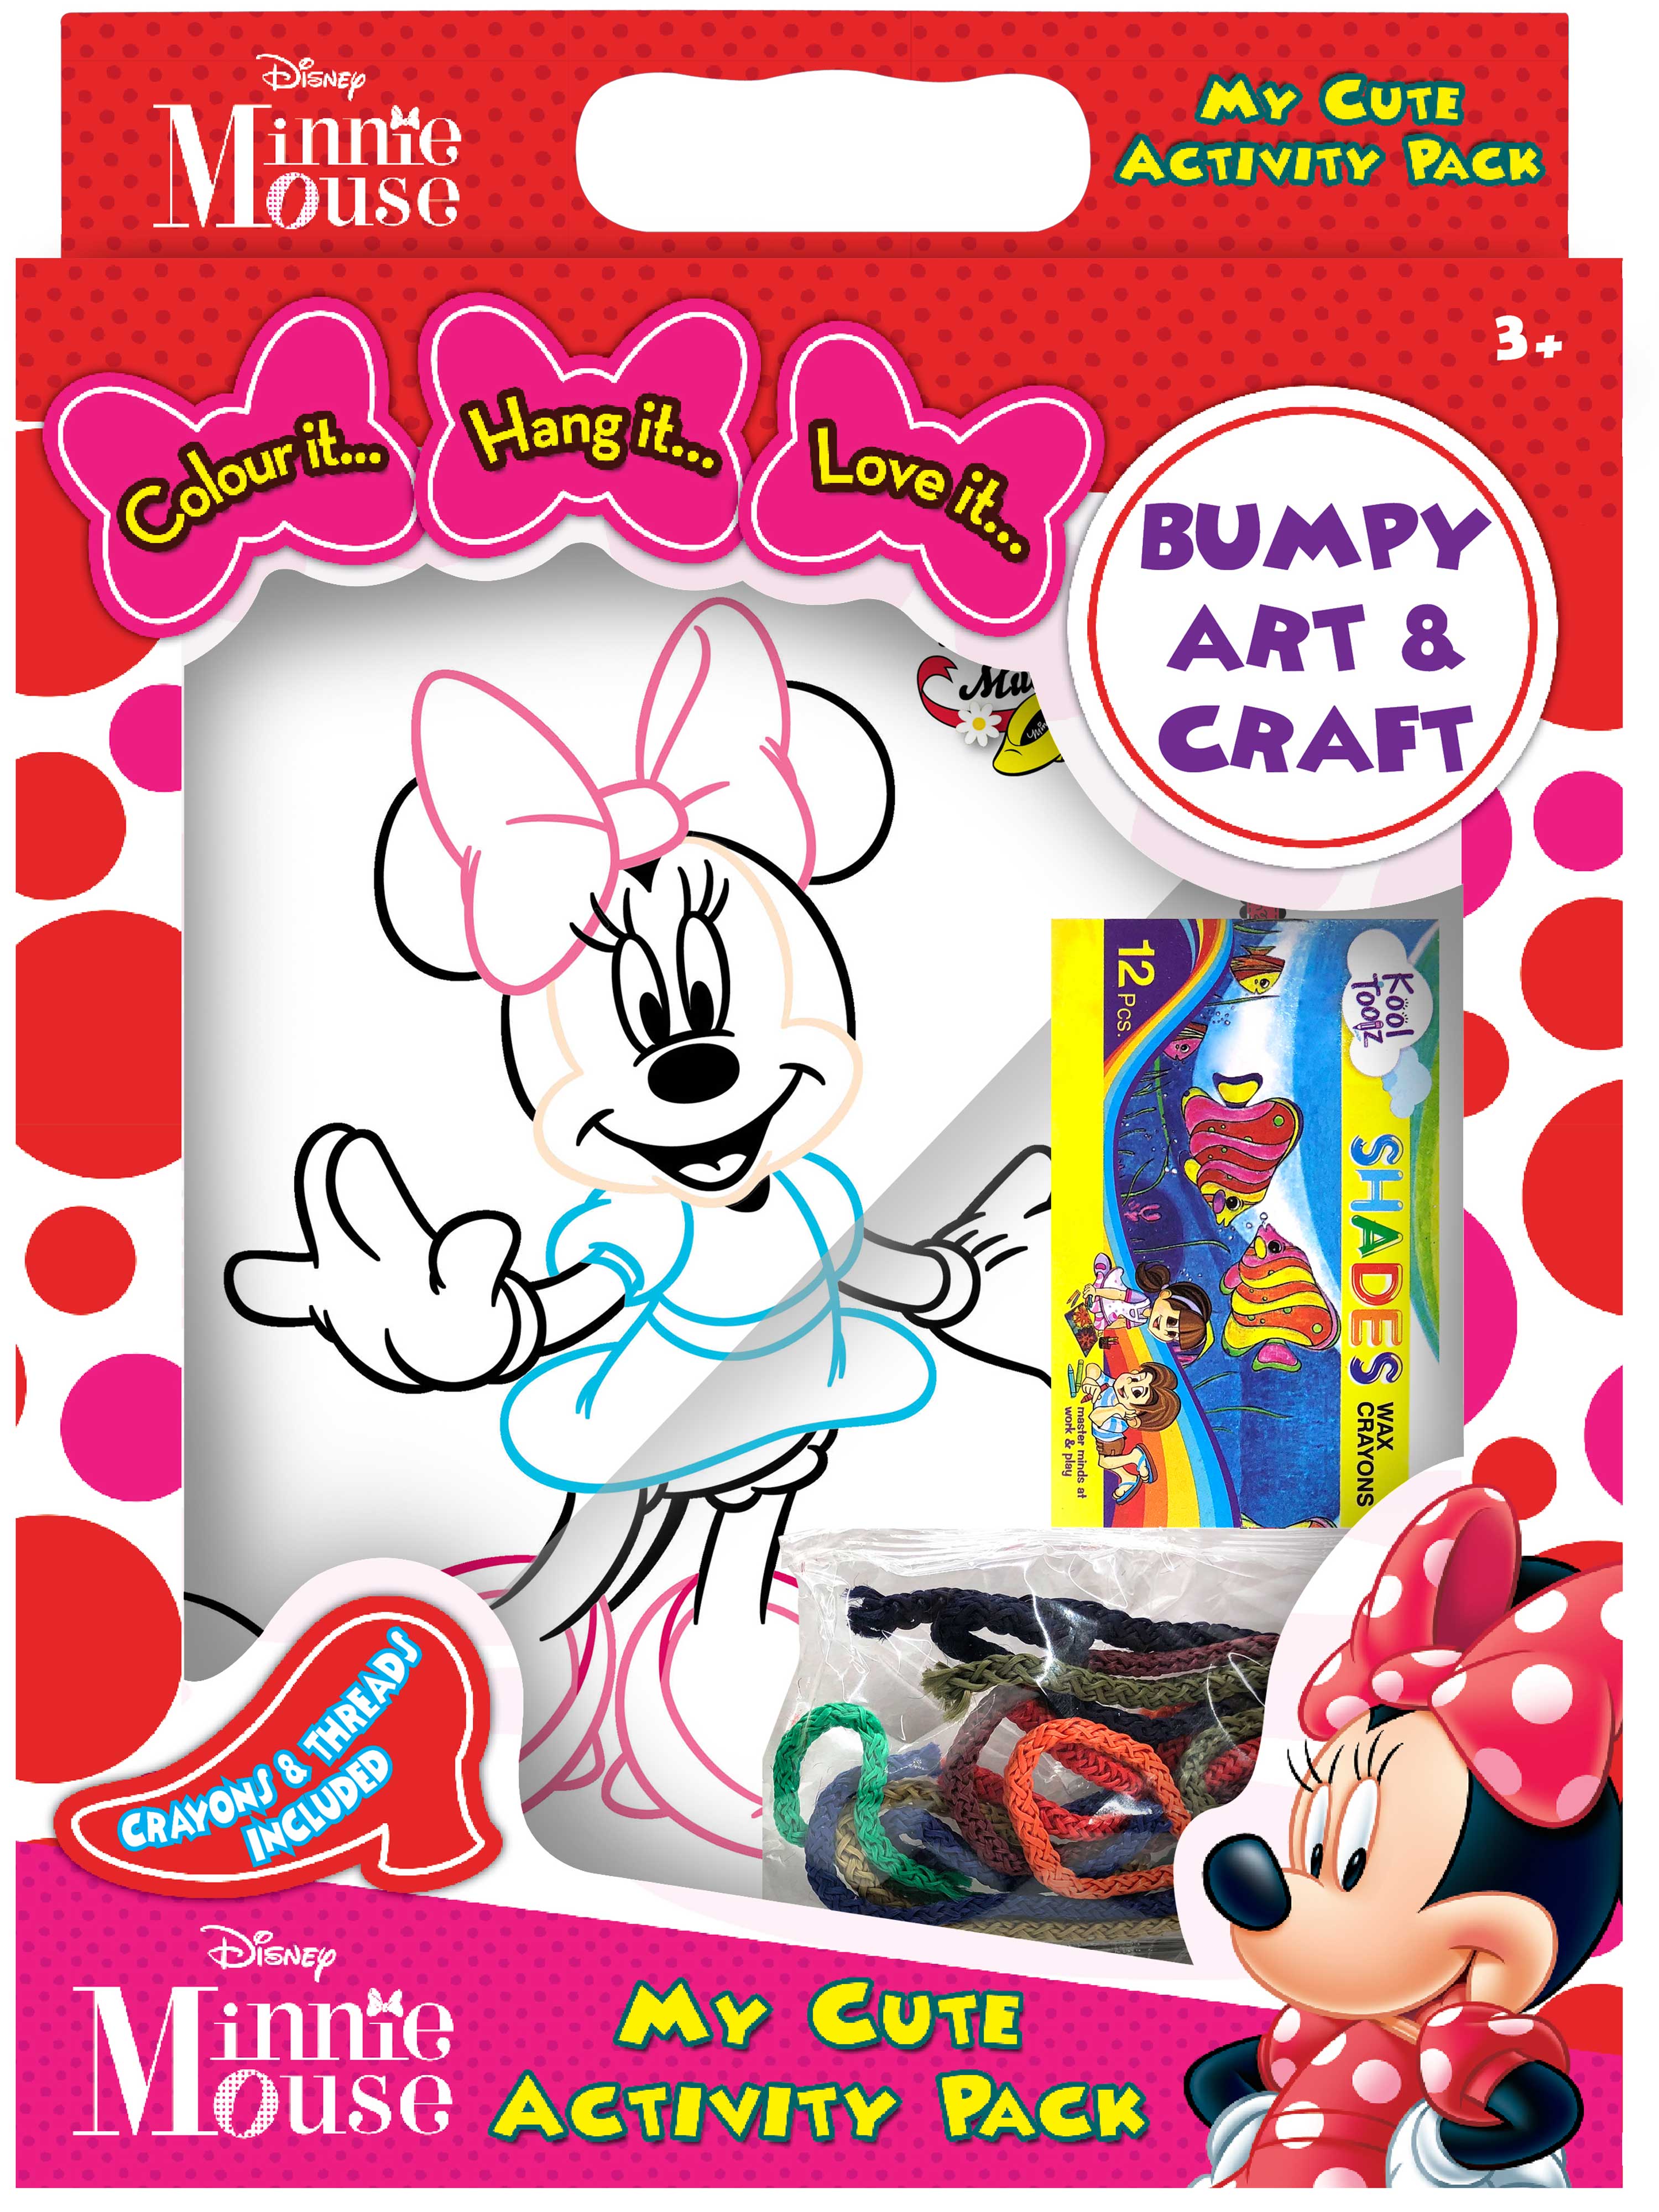 My Cute Activity Pack-Minnie Mouse Bumpy